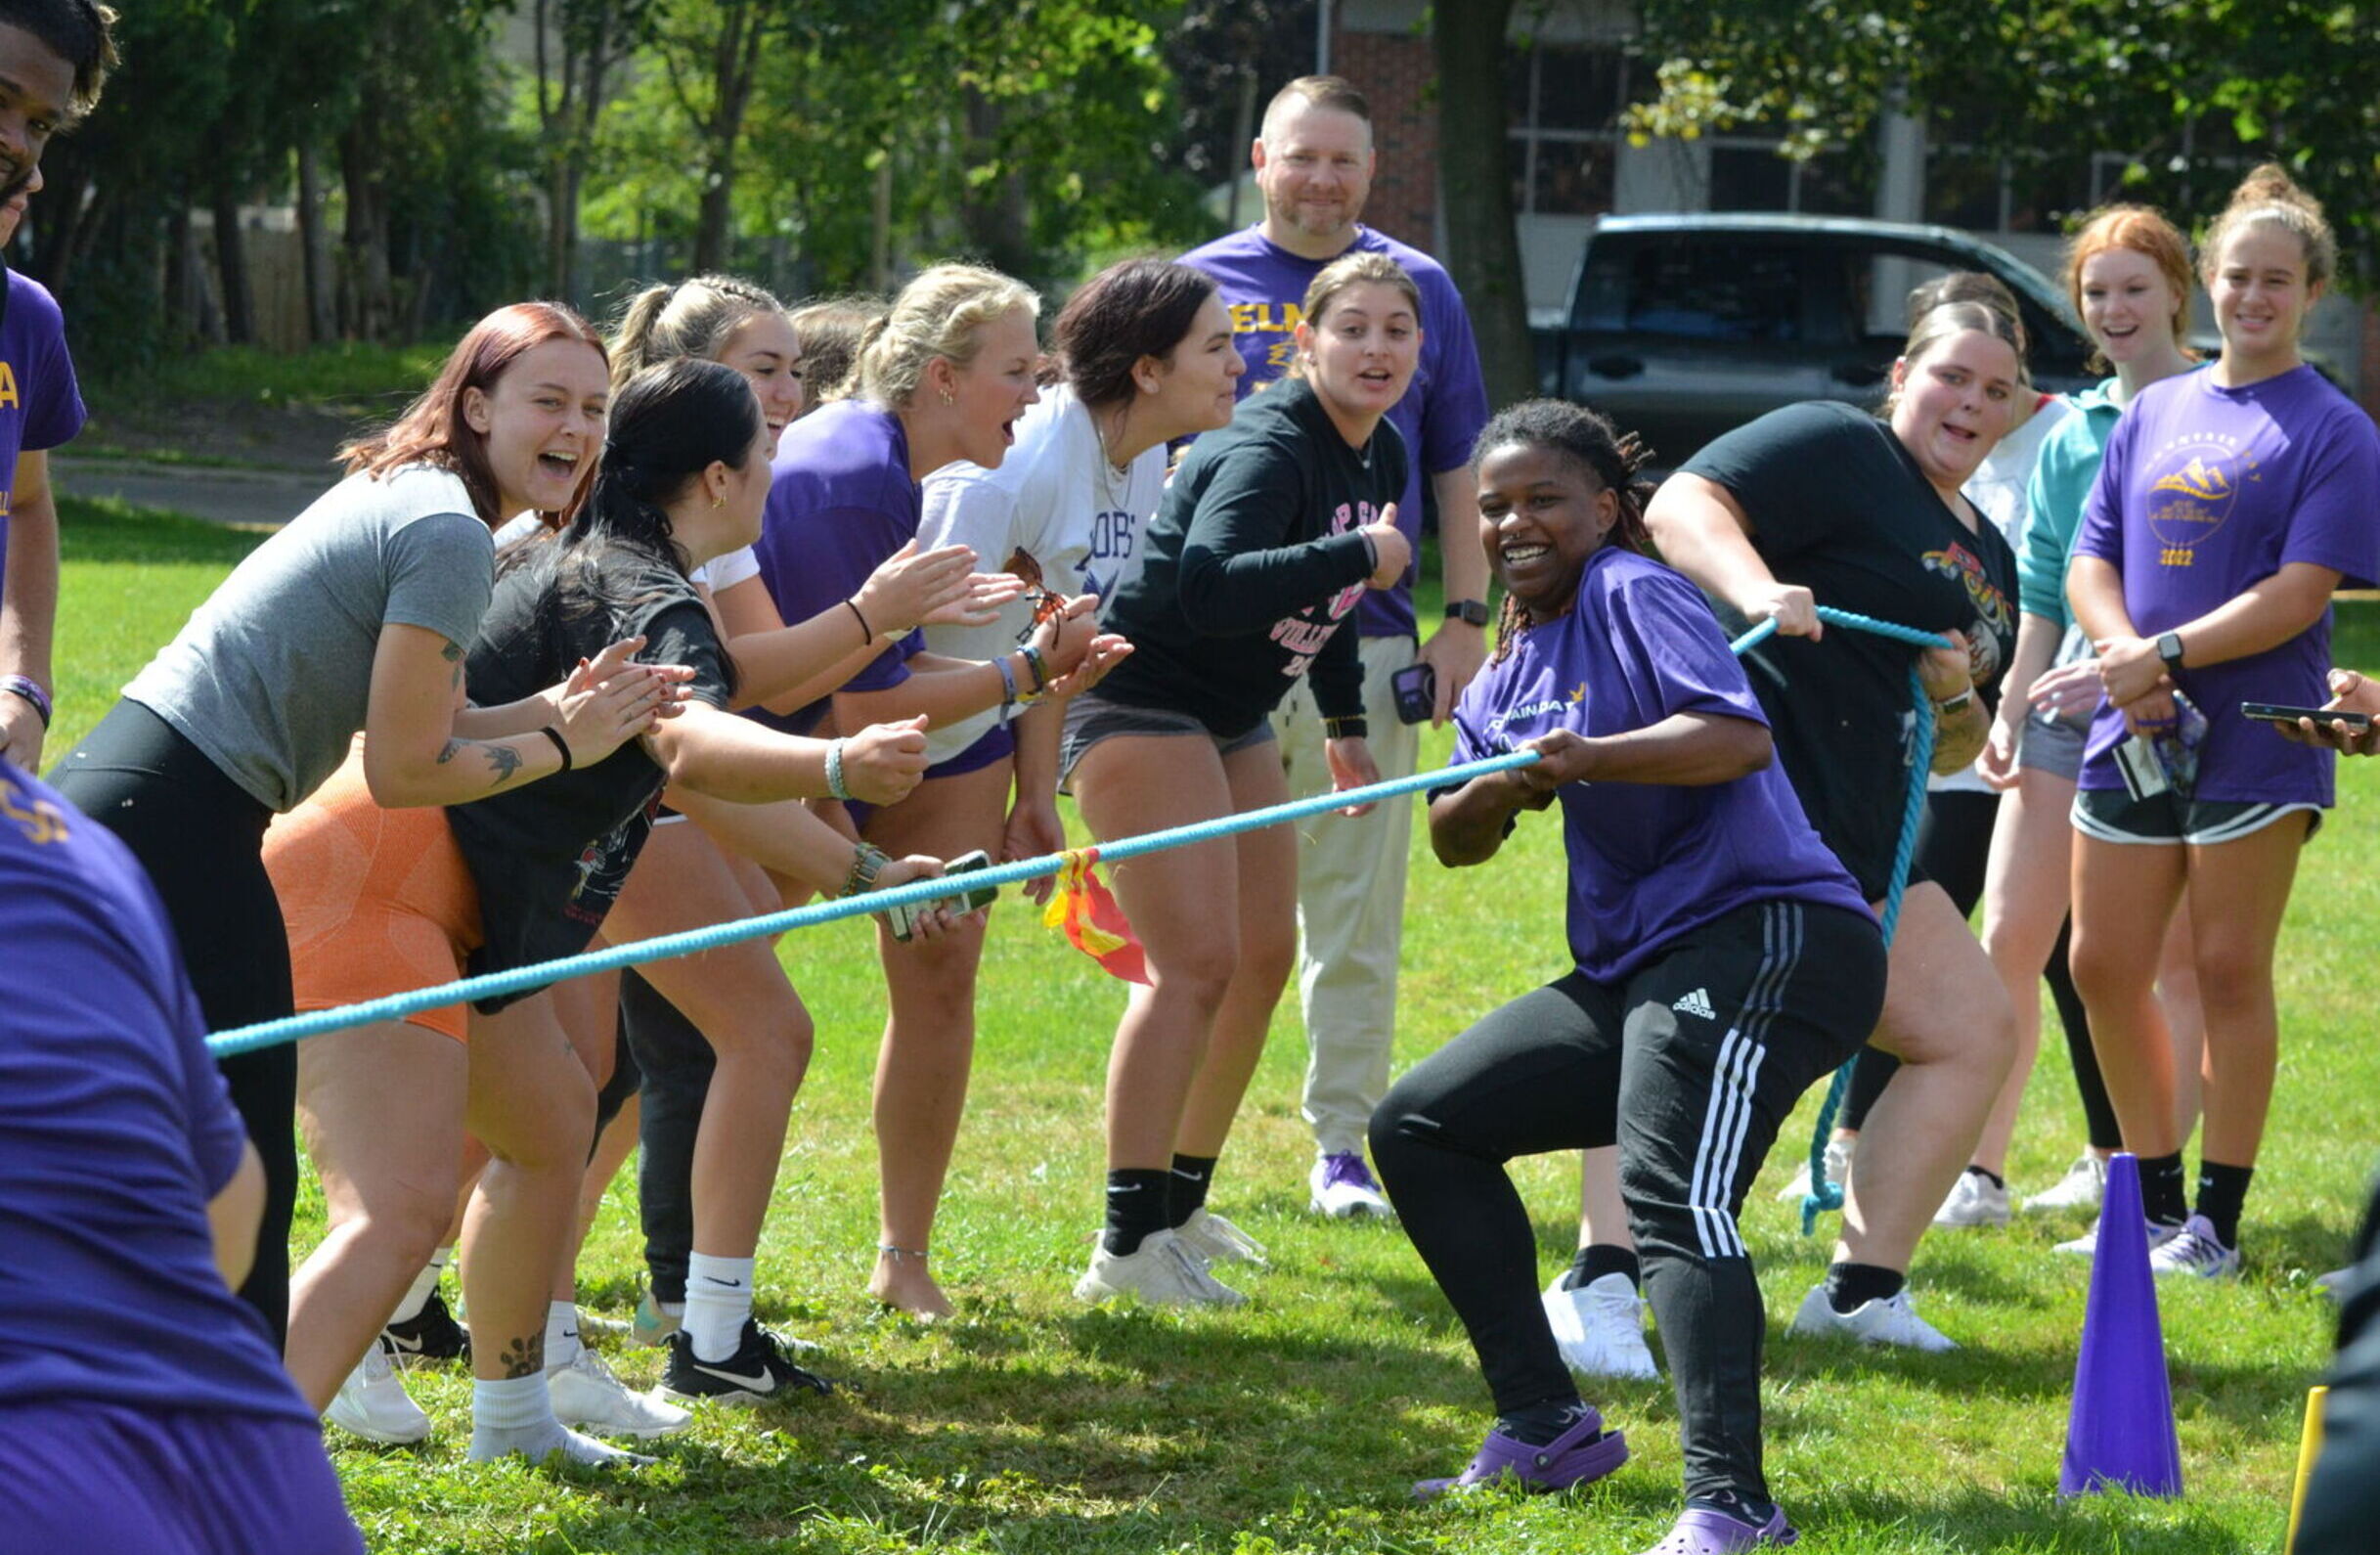 Students cheer on a team of two competing in tug-of-war